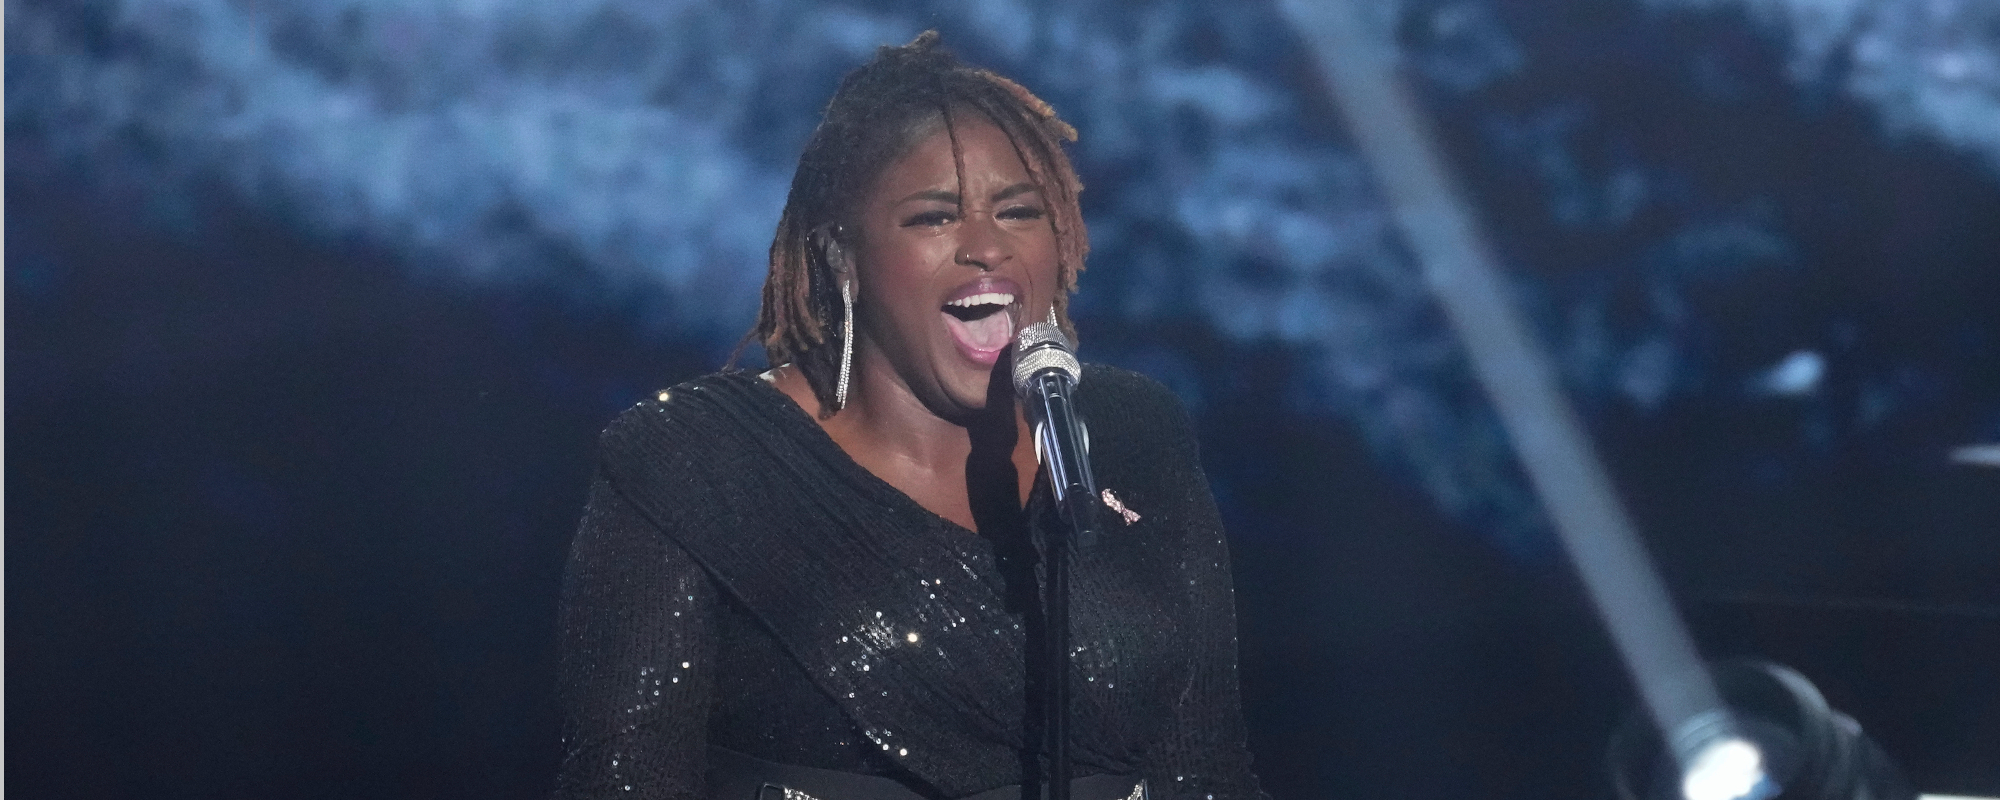 Lucy Love Gets Standing Ovation from Judges for Original Song “Boulders” on ‘American Idol’